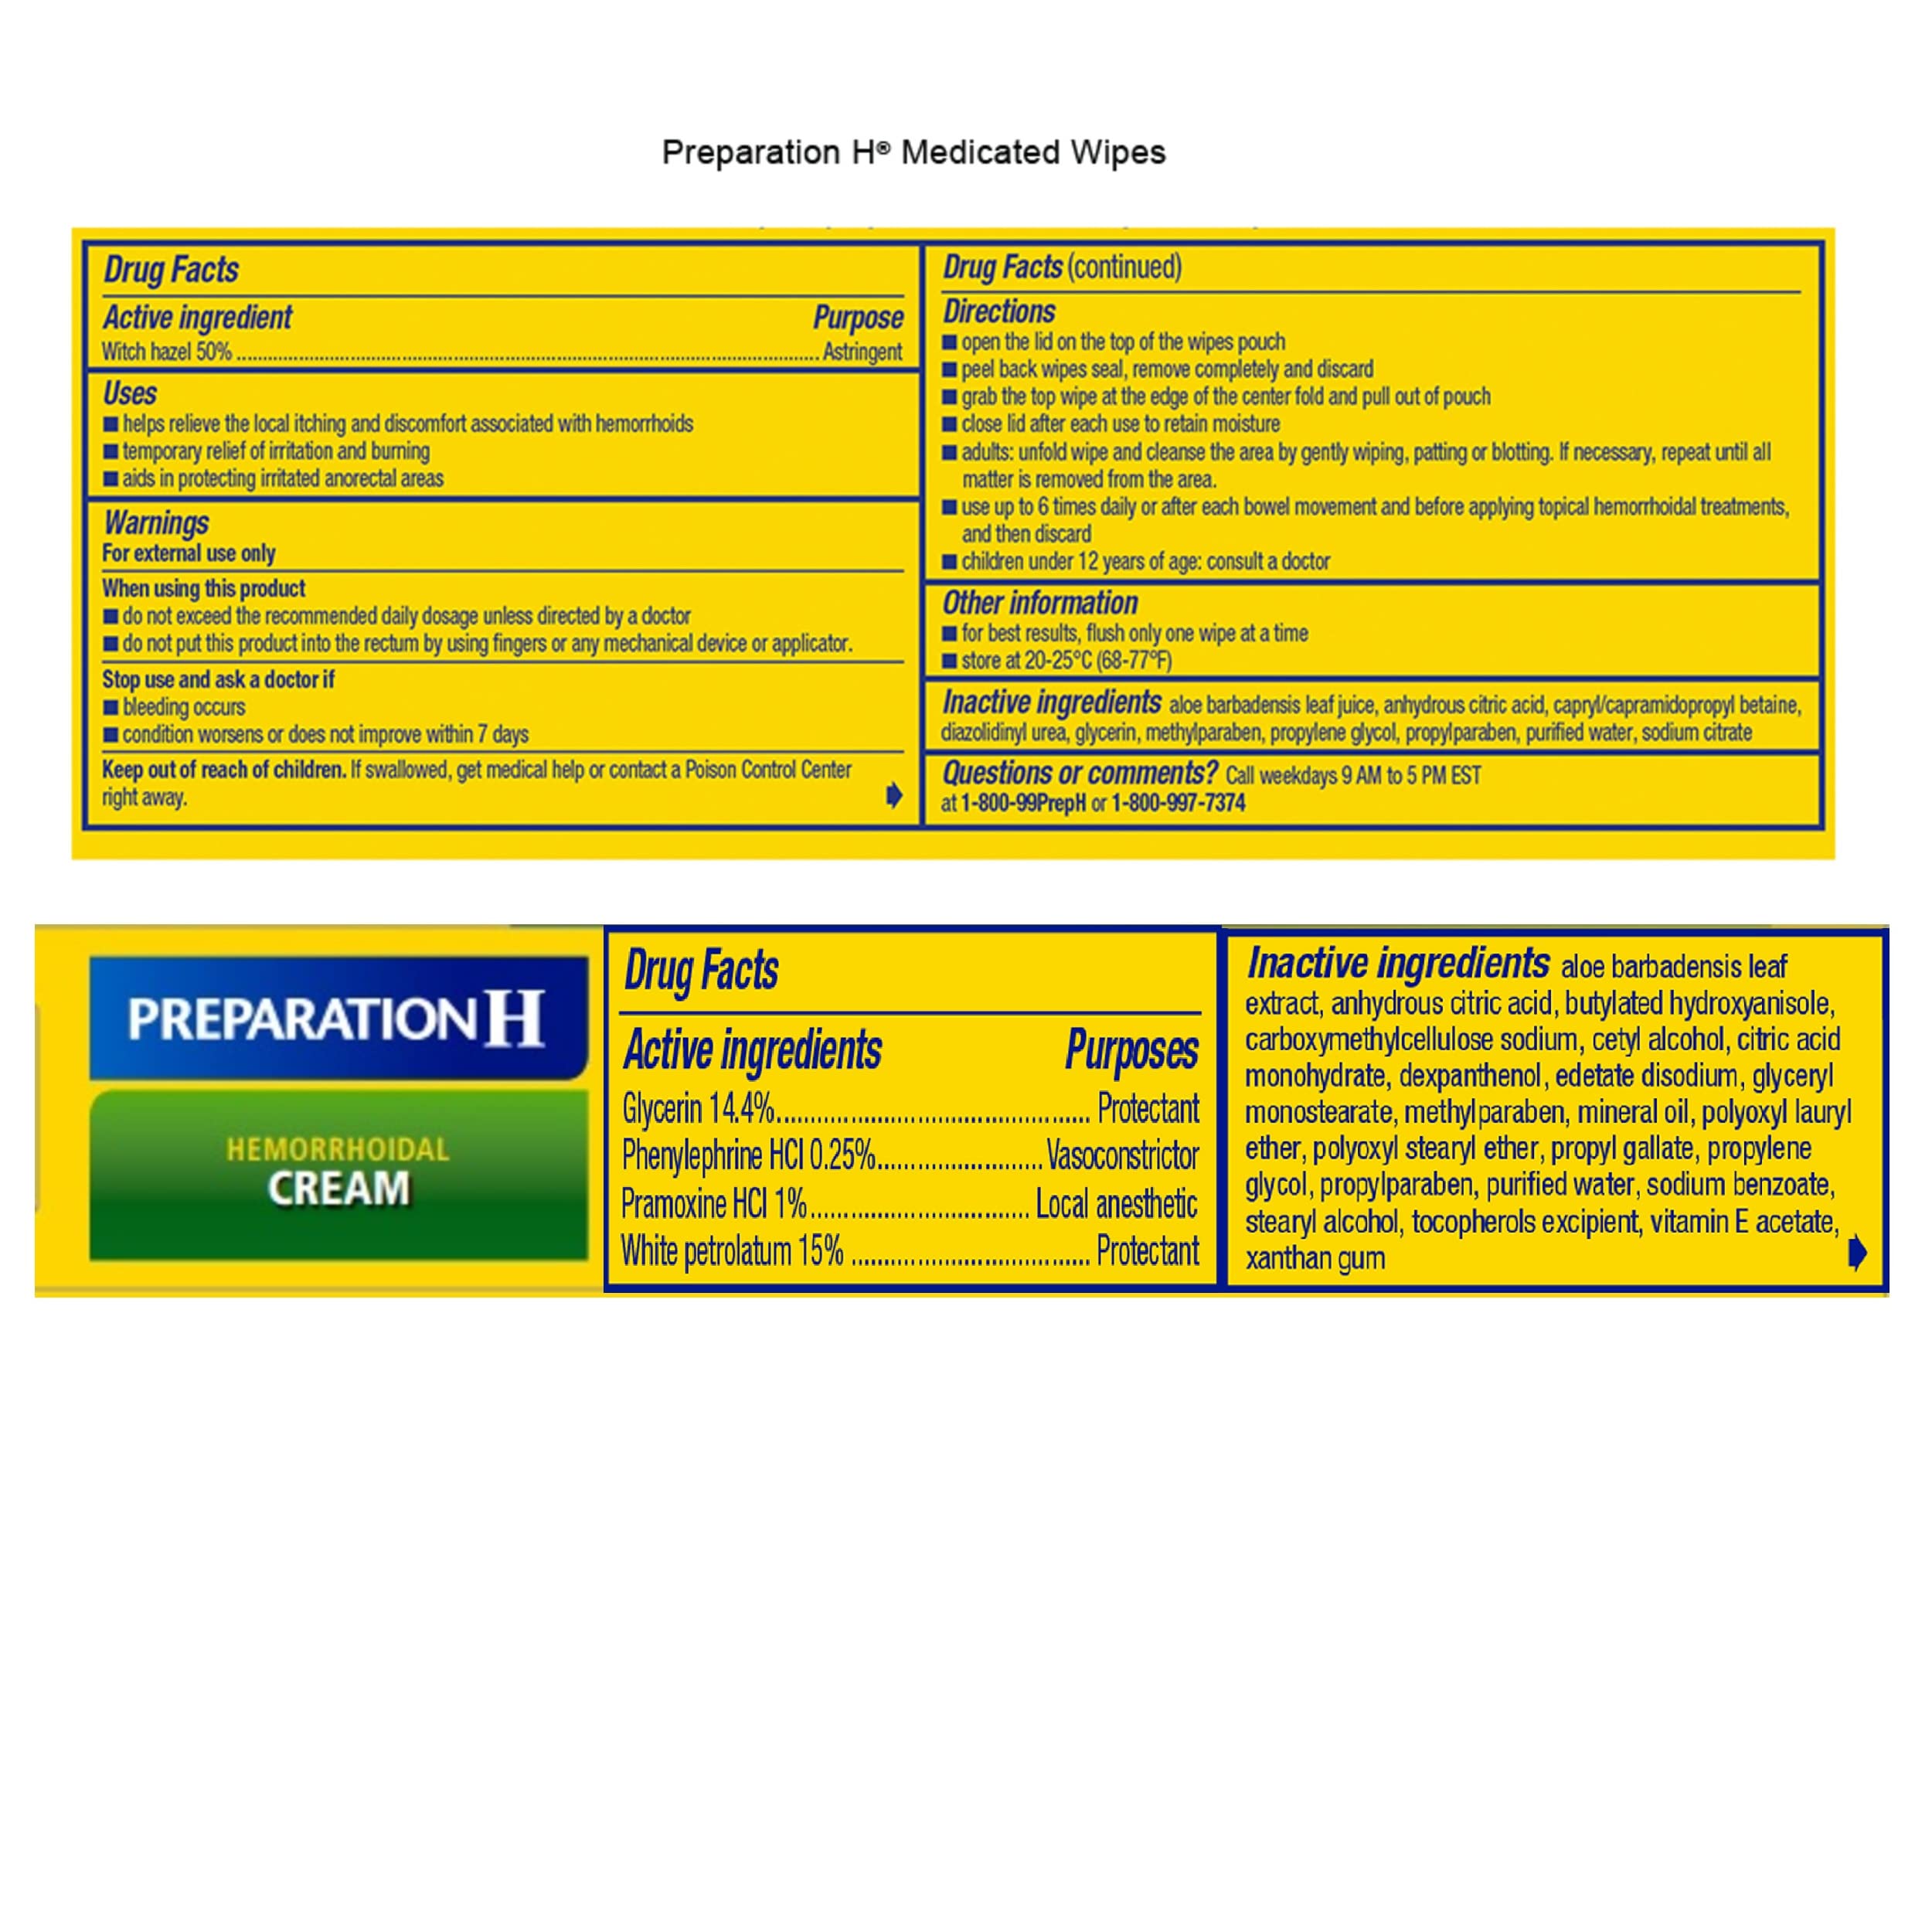 Preparation H Hemorrhoid Wipes with Witch Hazel, 192 Ct Plus Preparation H Hemorrhoid Symptom Treatment Cream, 2 Tubes x 1.8 oz, Wipe Plus Treat for Better Relief, Hemorrhoid Care Bundle